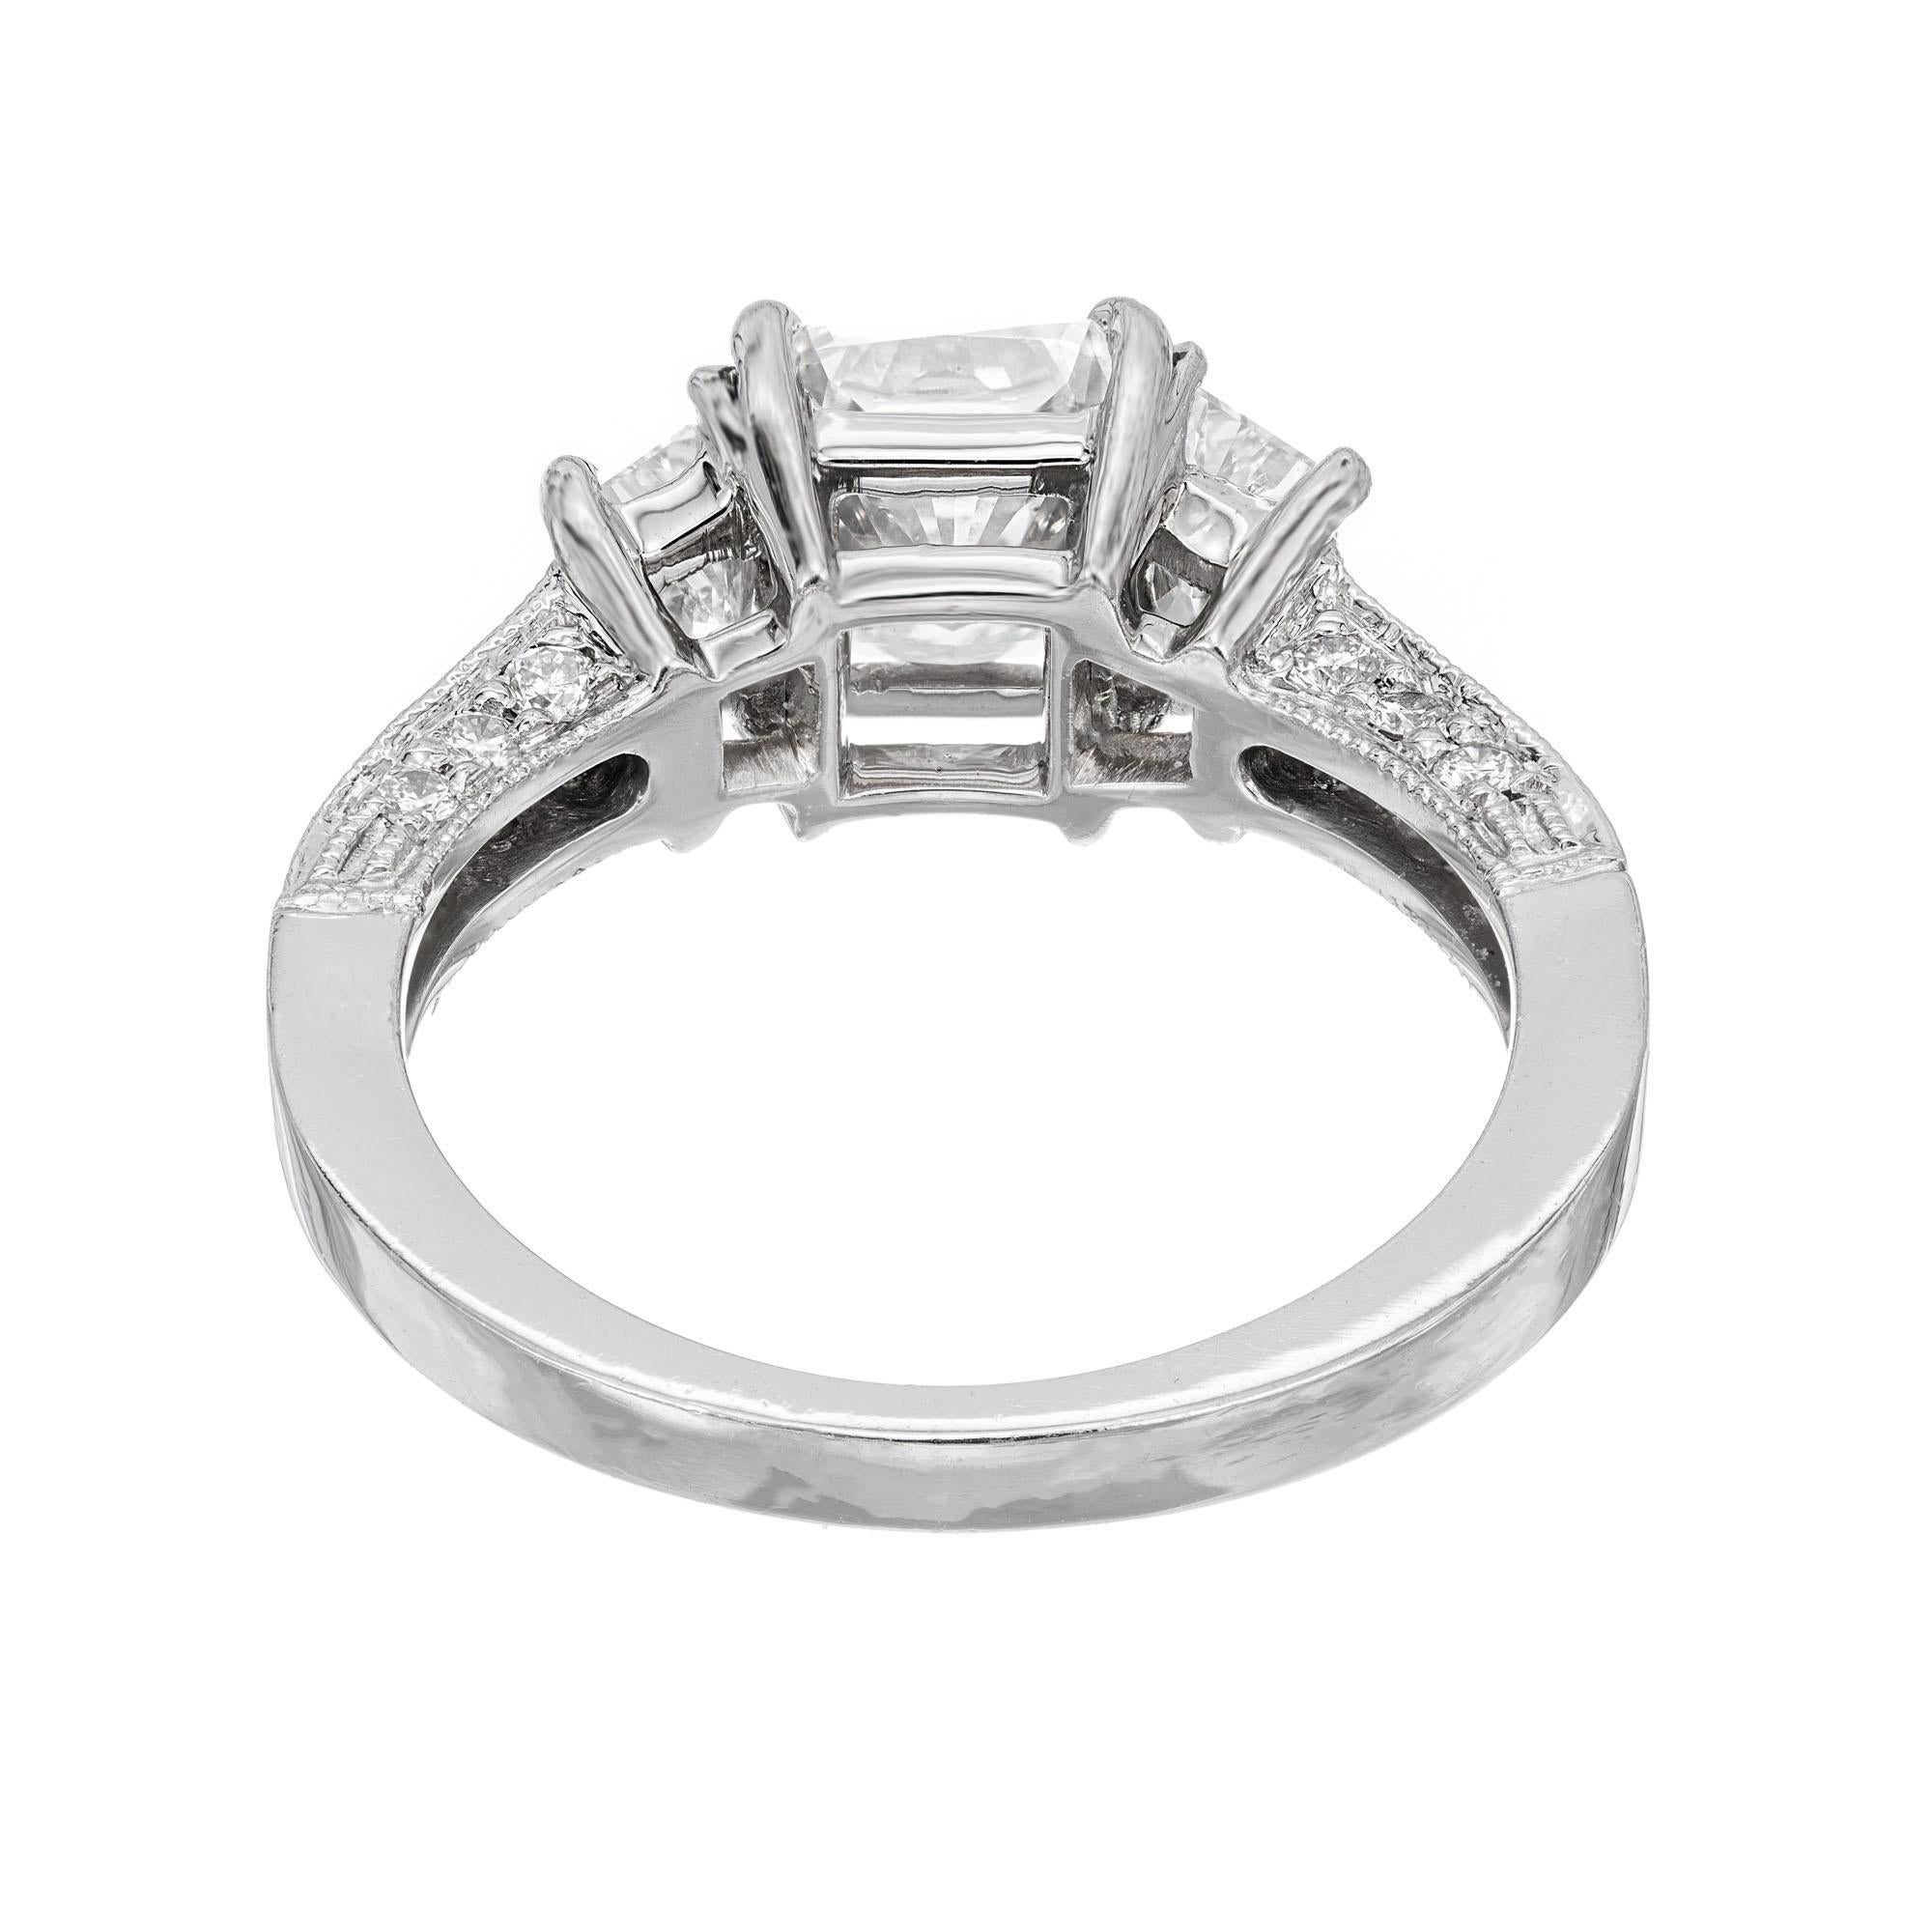 Martin Flyer GIA Cert 1.22 Carat Diamond Platinum Three-Stone Engagement Ring In Good Condition For Sale In Stamford, CT